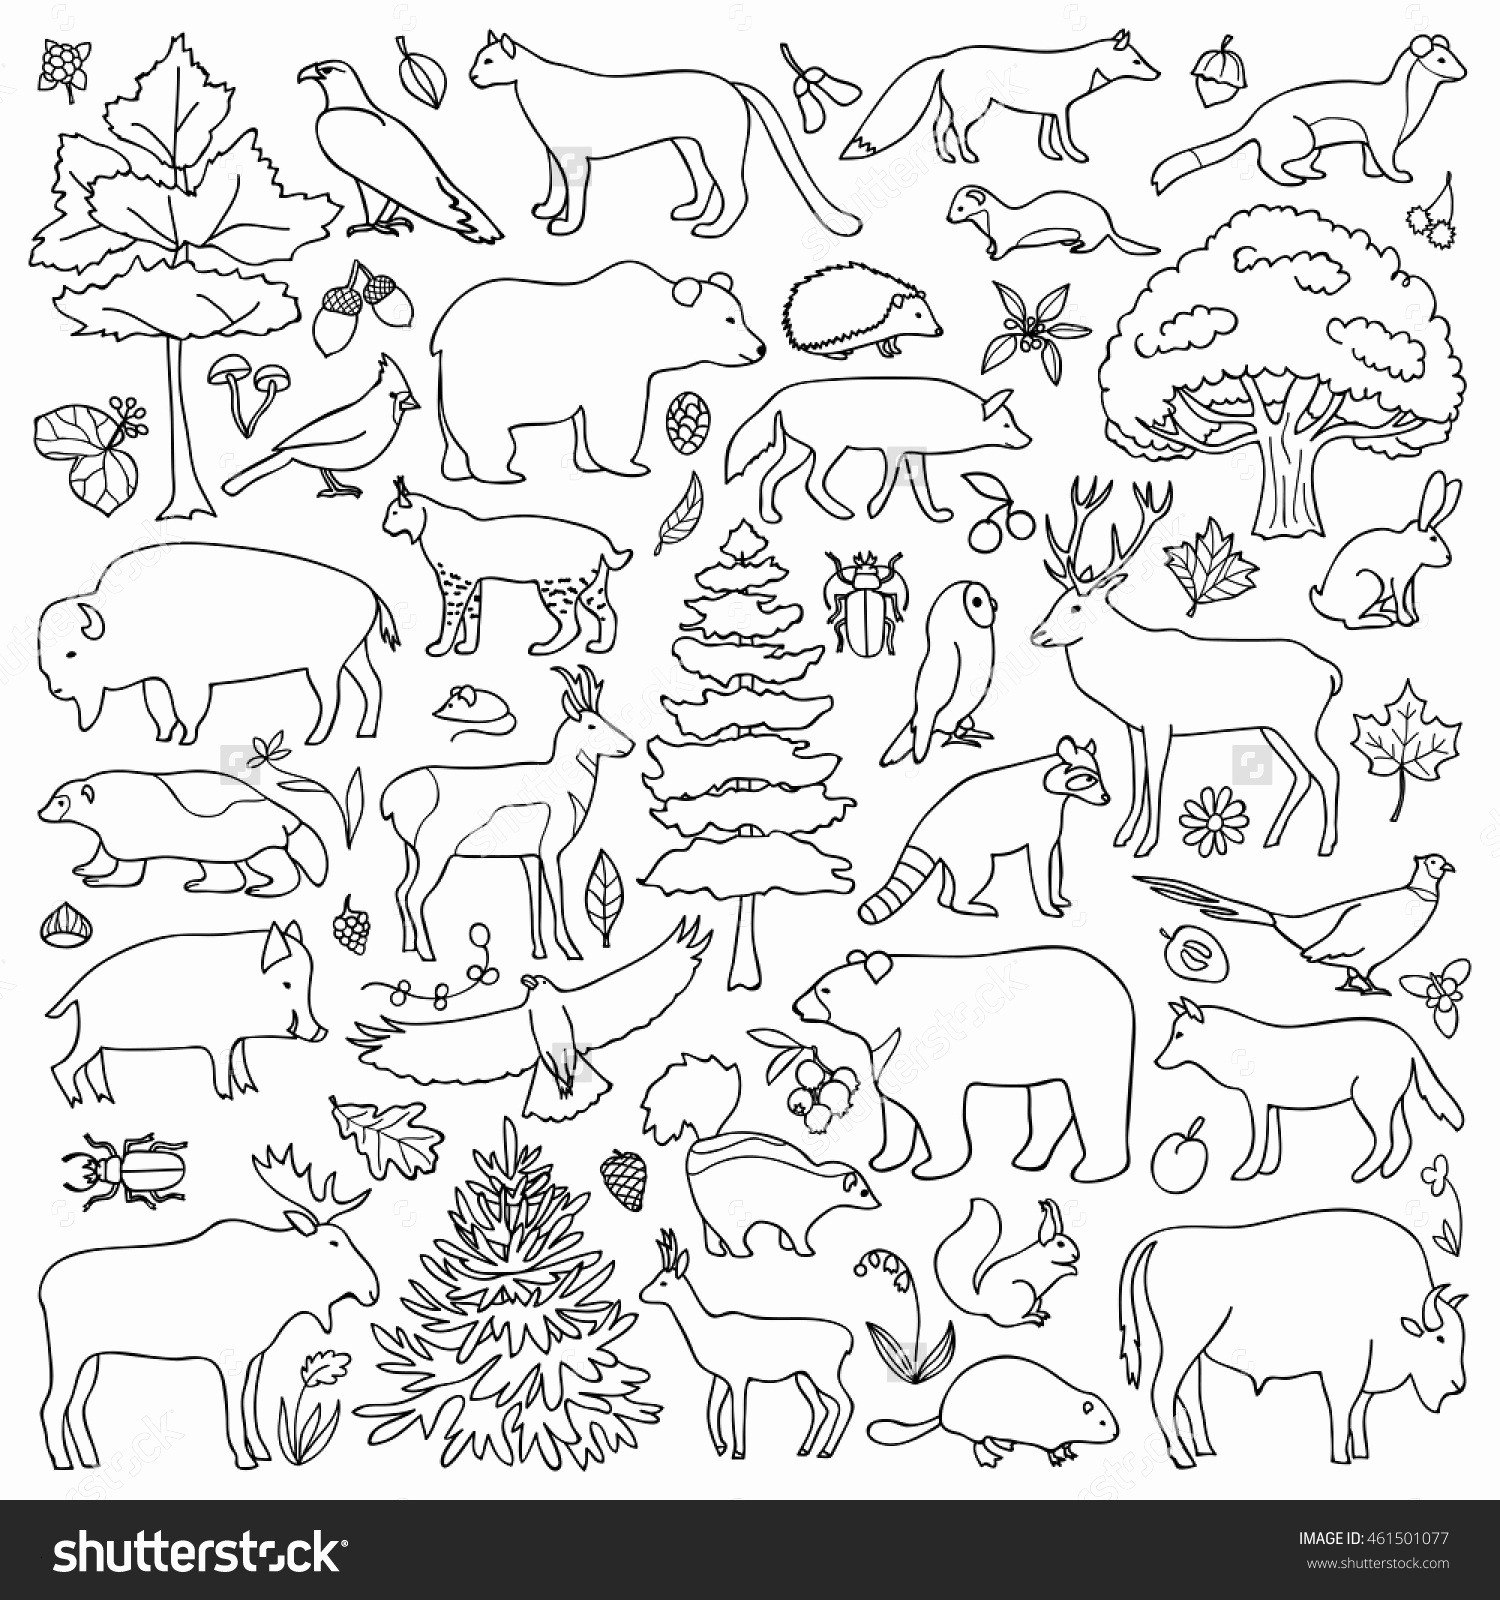 Animal Habitats Coloring Pages Awesome forest Animals Coloring Pages